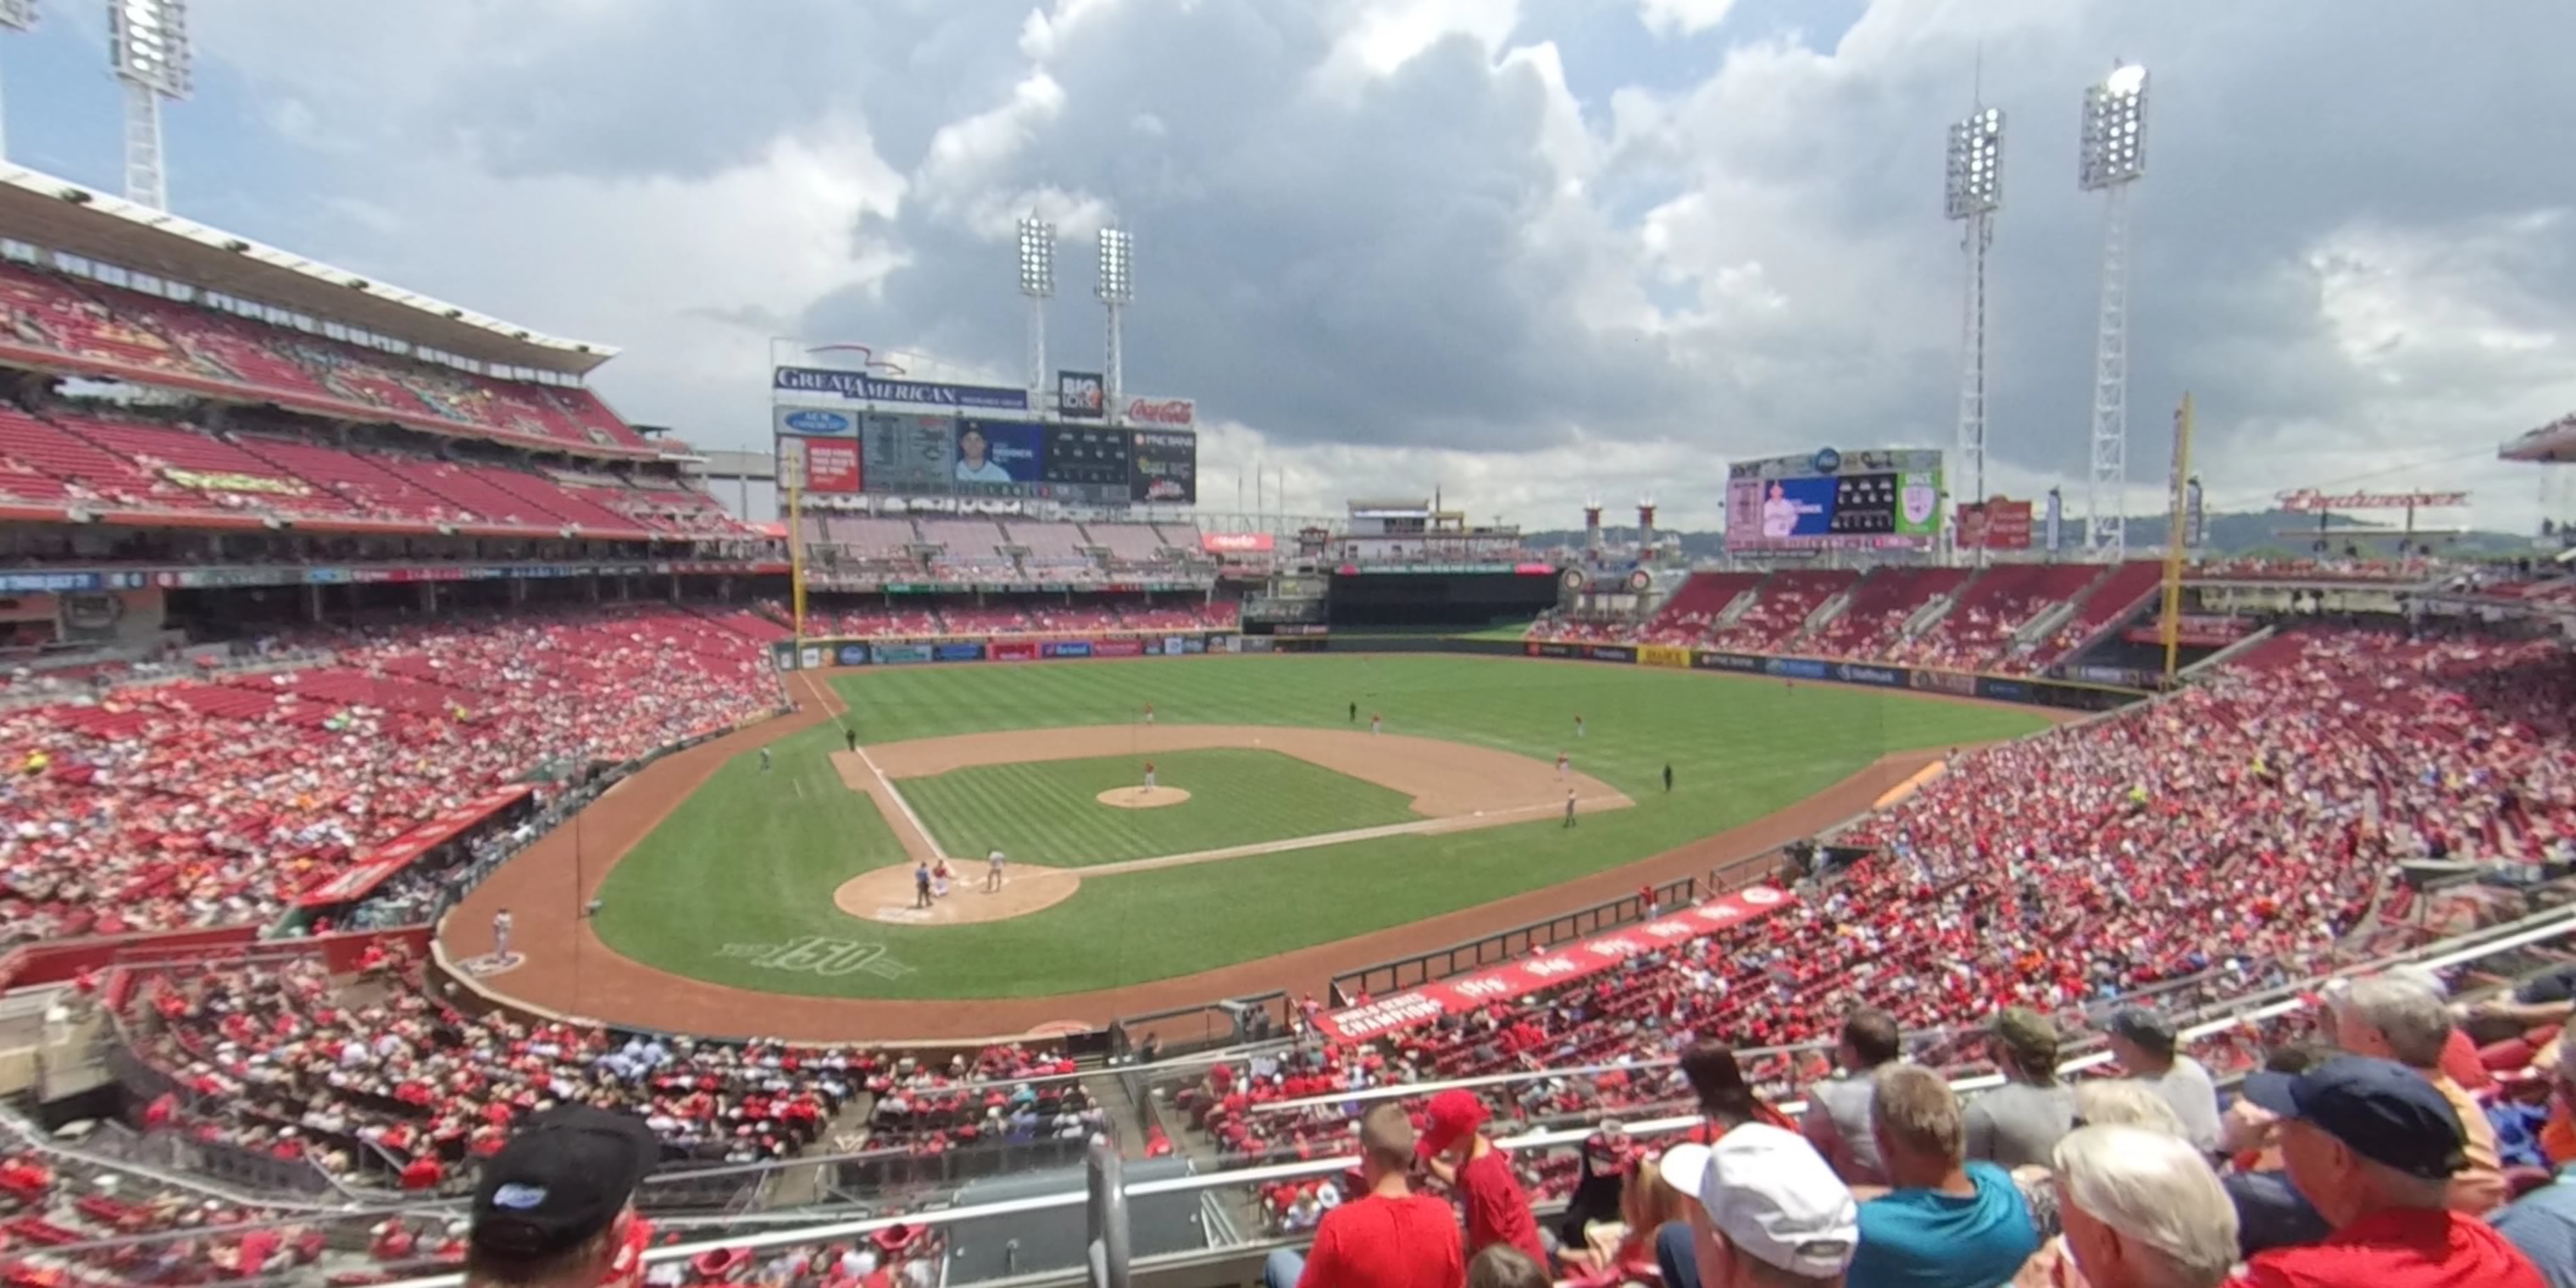 section 226 panoramic seat view  for baseball - great american ball park